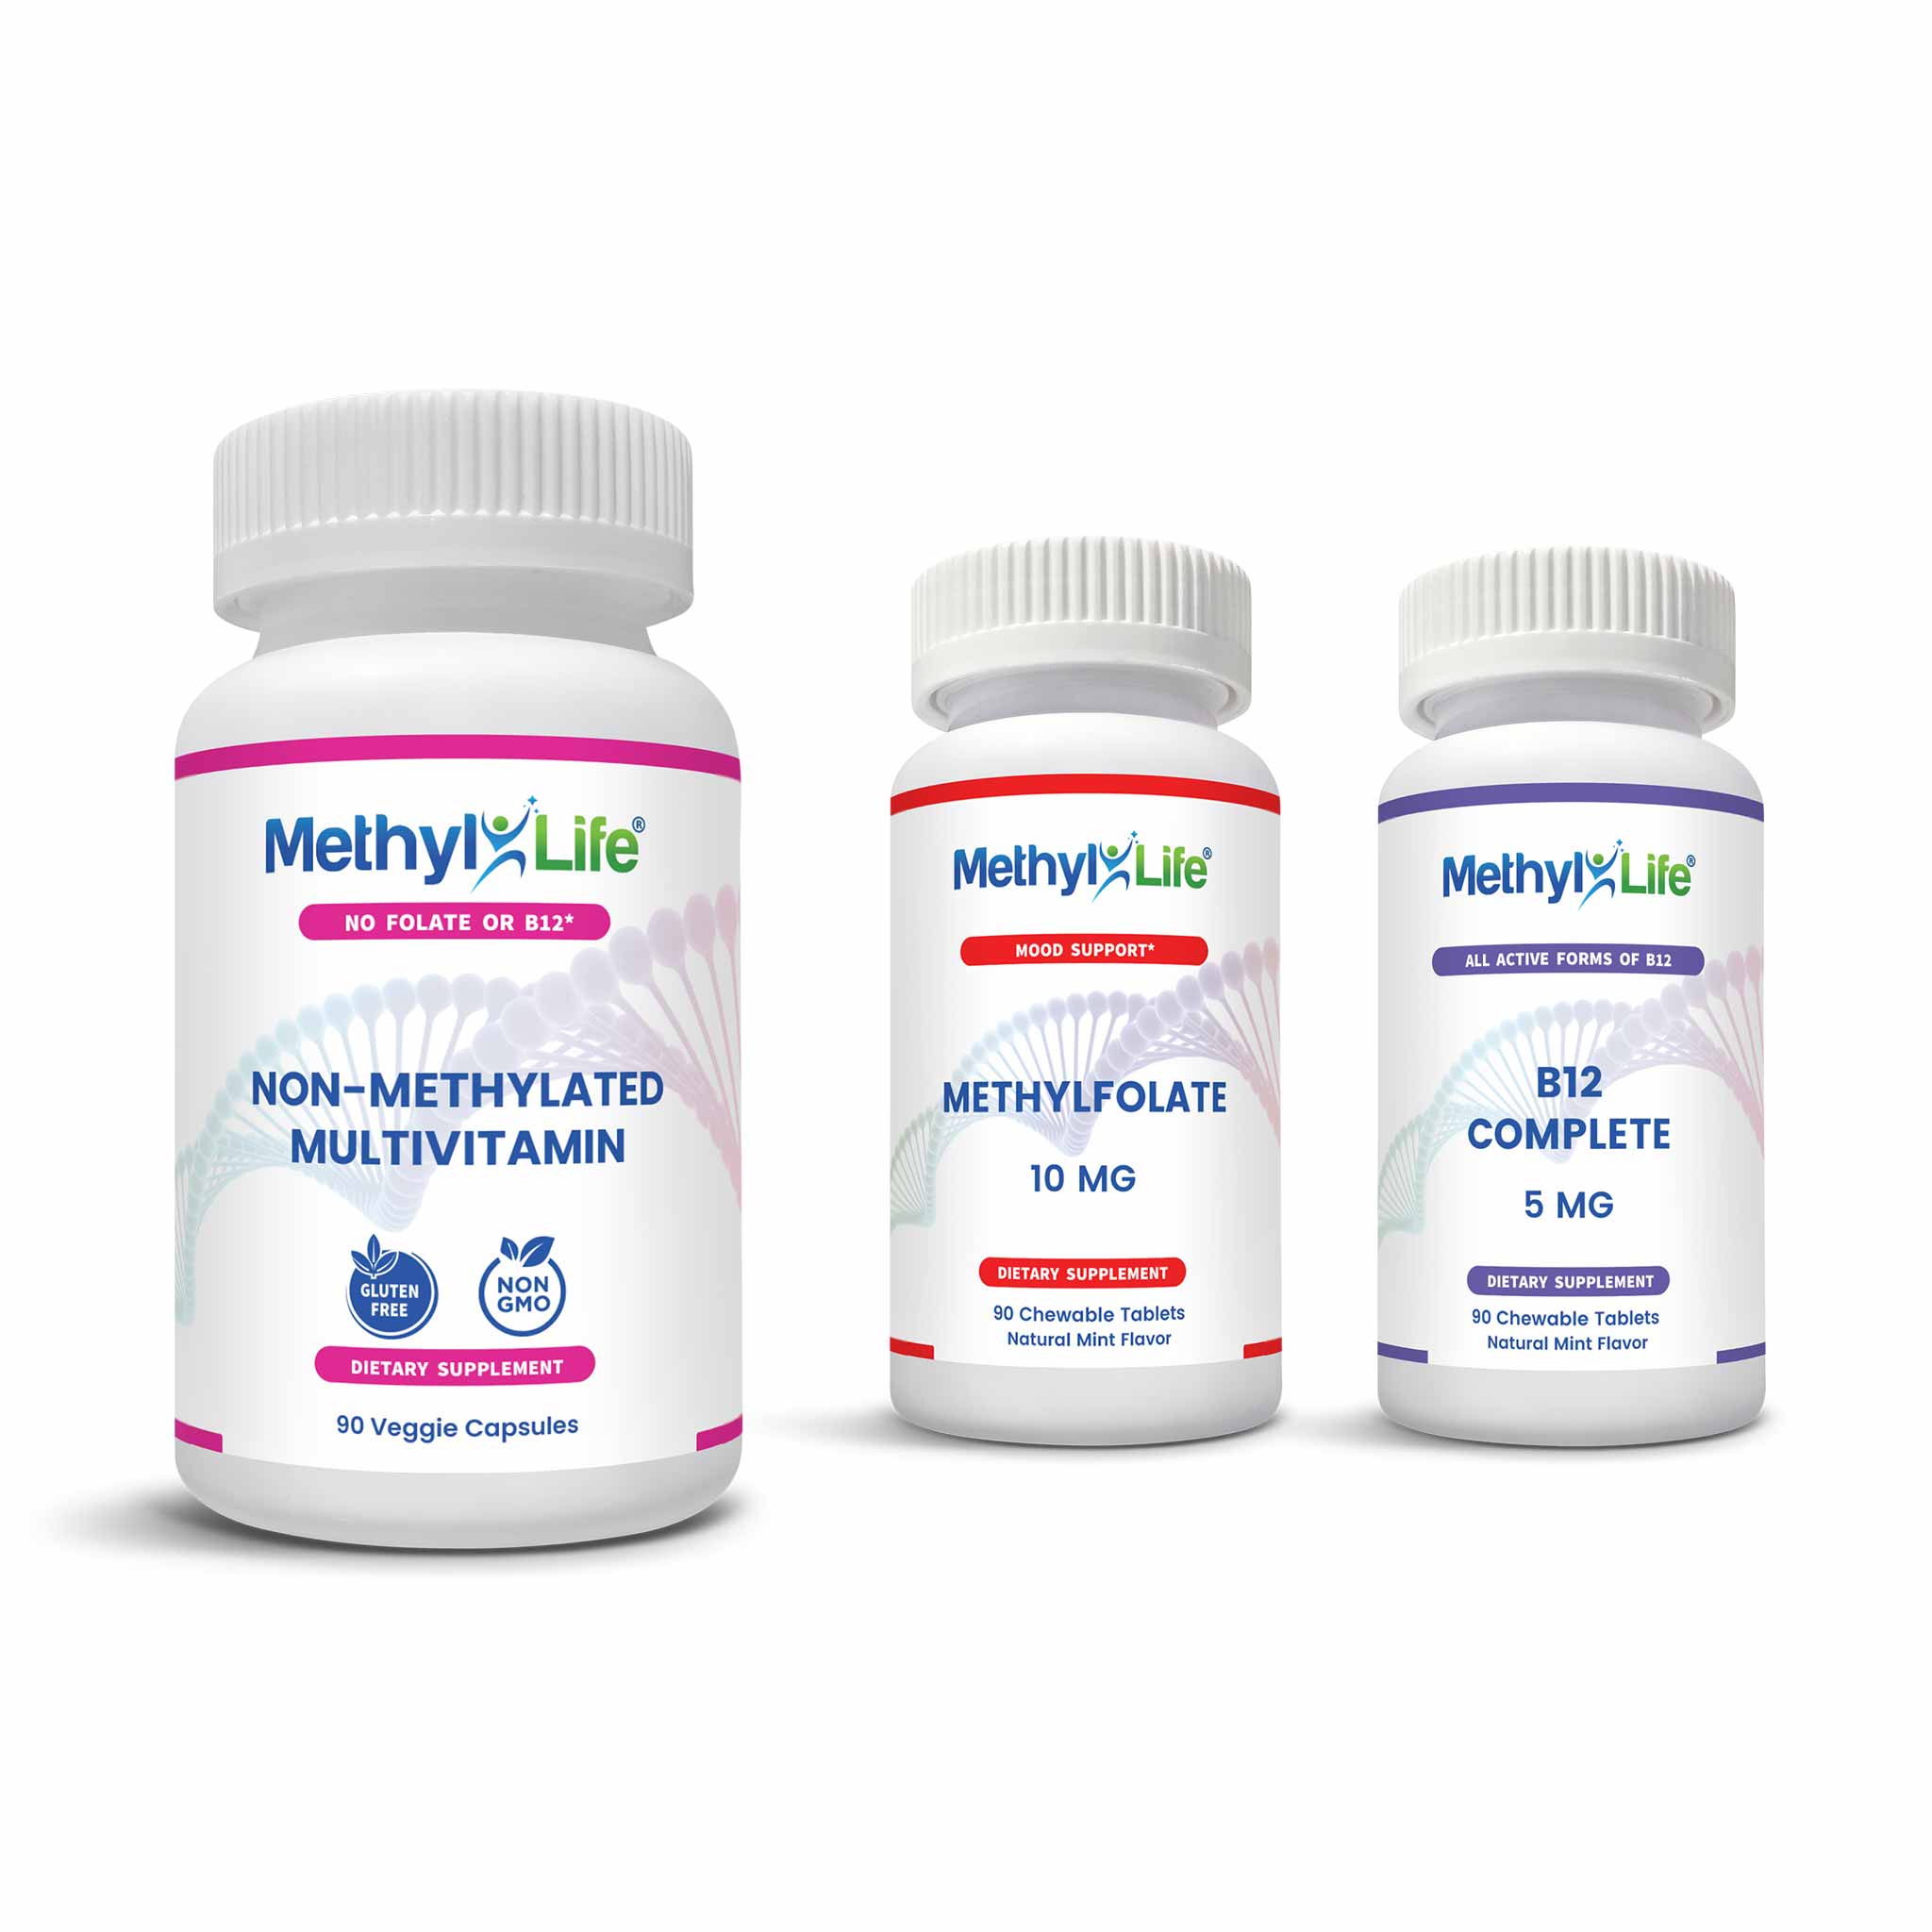 Mood Support Bundle (3 product bottles) - L-Methylfolate 10 mg + Active B12 Complete + Non-Methylated Multivitamin - Methyl-Life